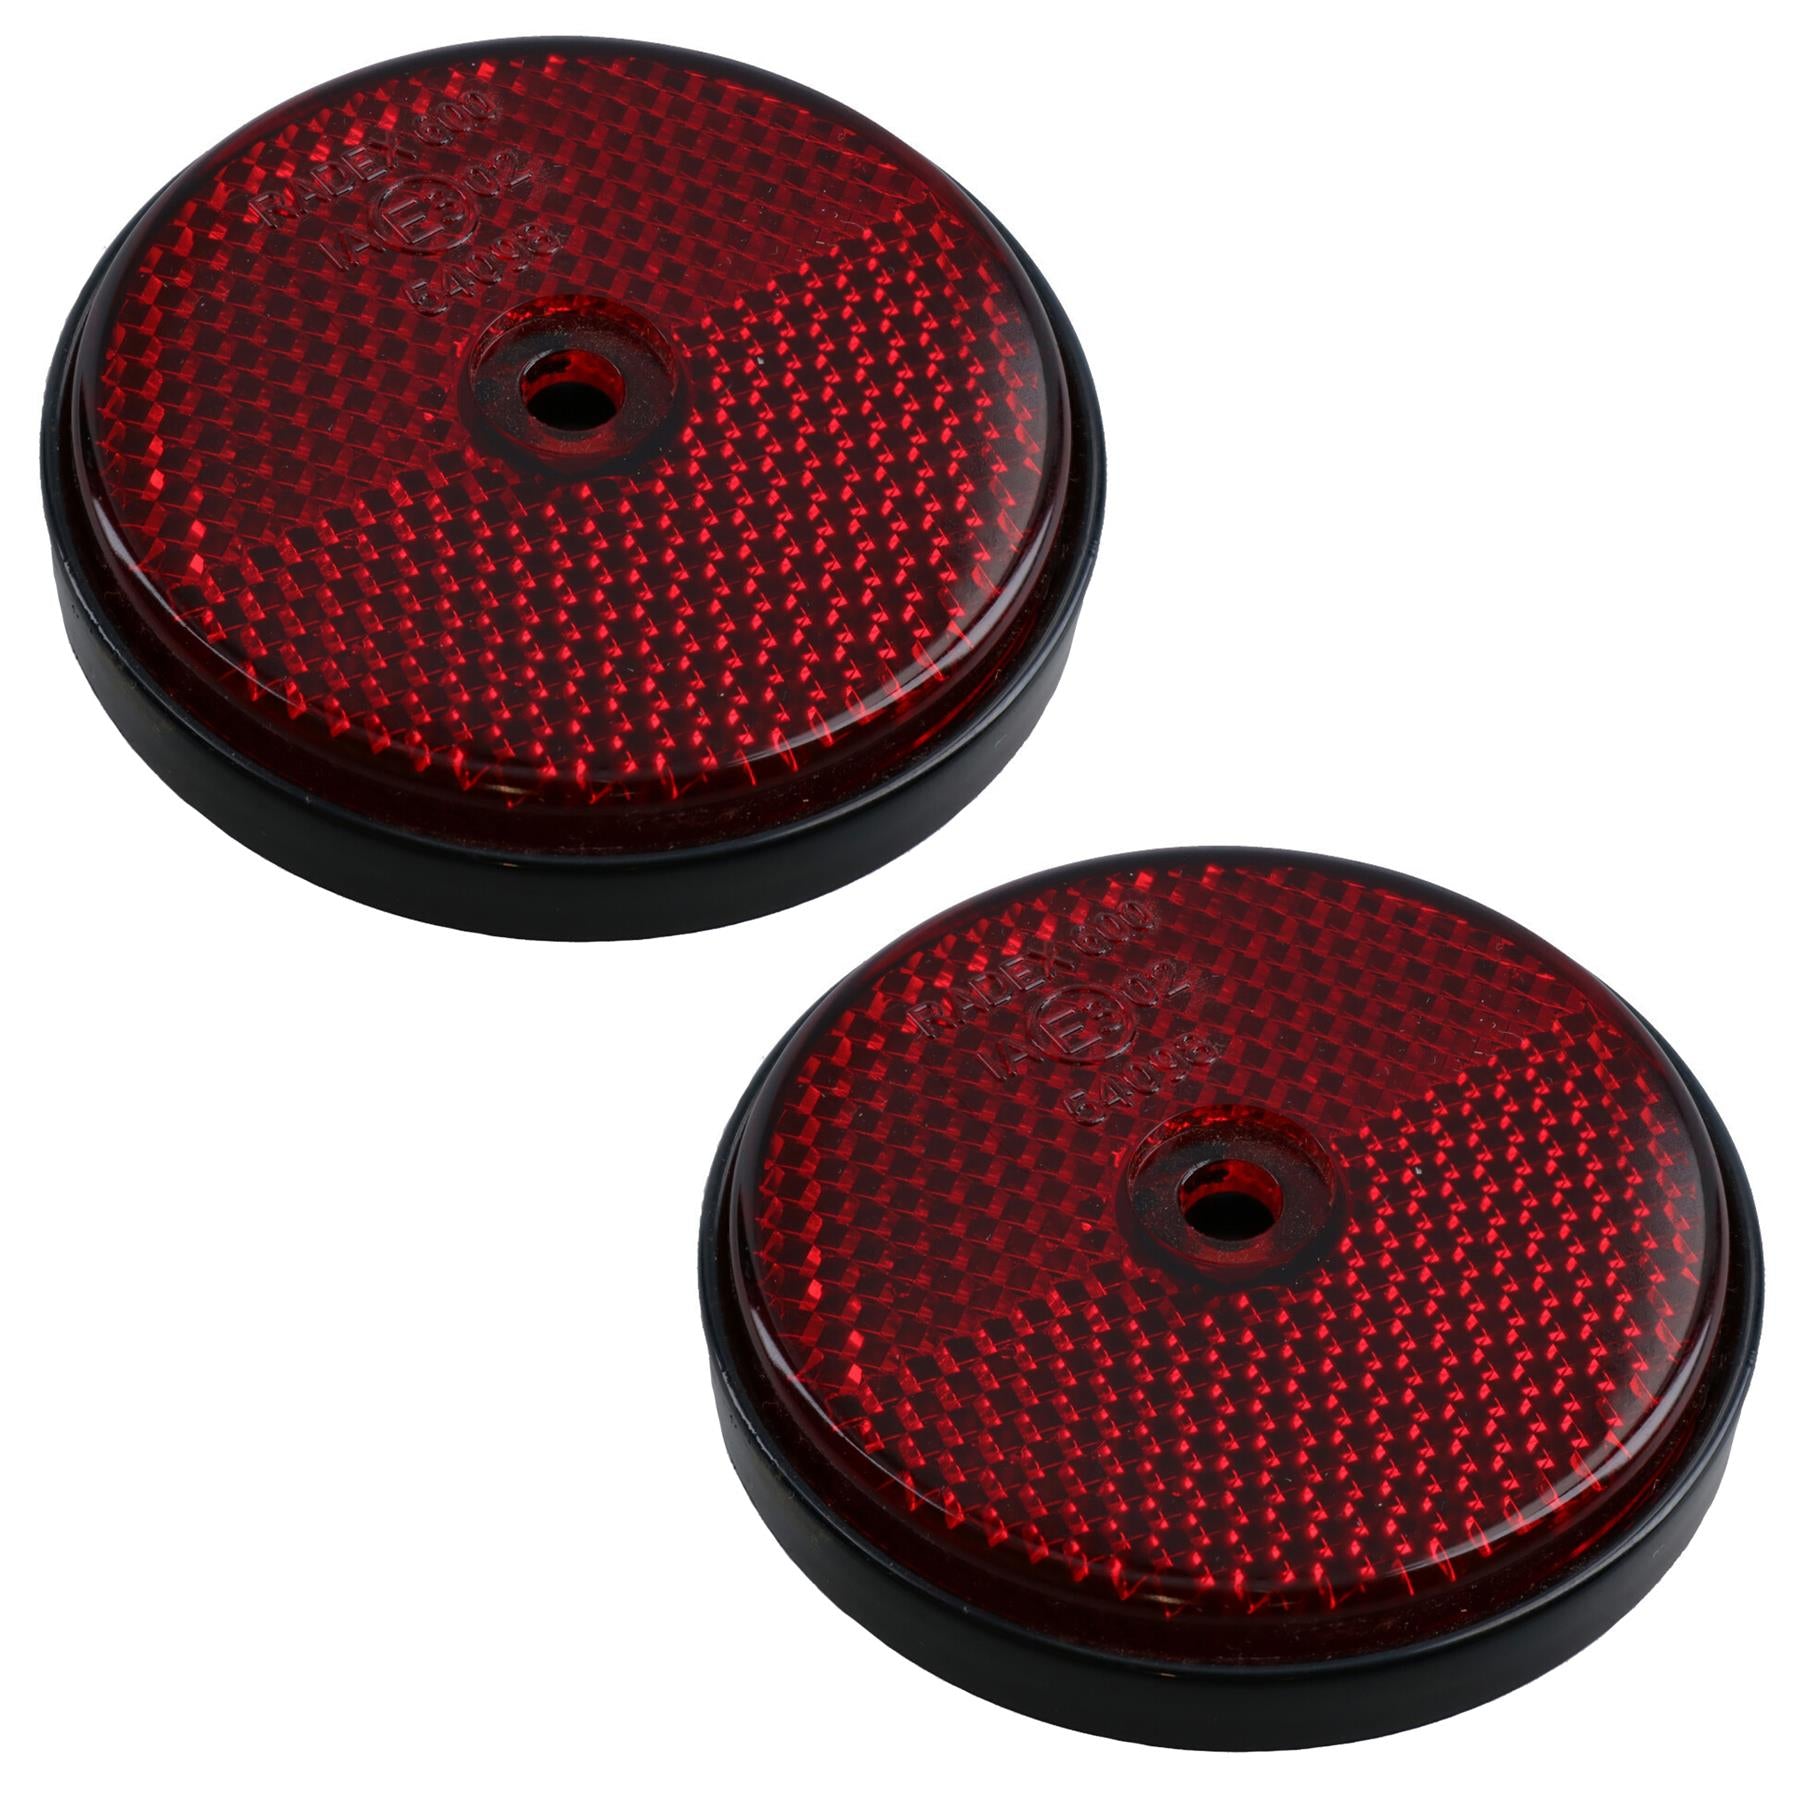 Red Round Circular Reflectors for Driveway Gate Fence Posts Trailer Rears